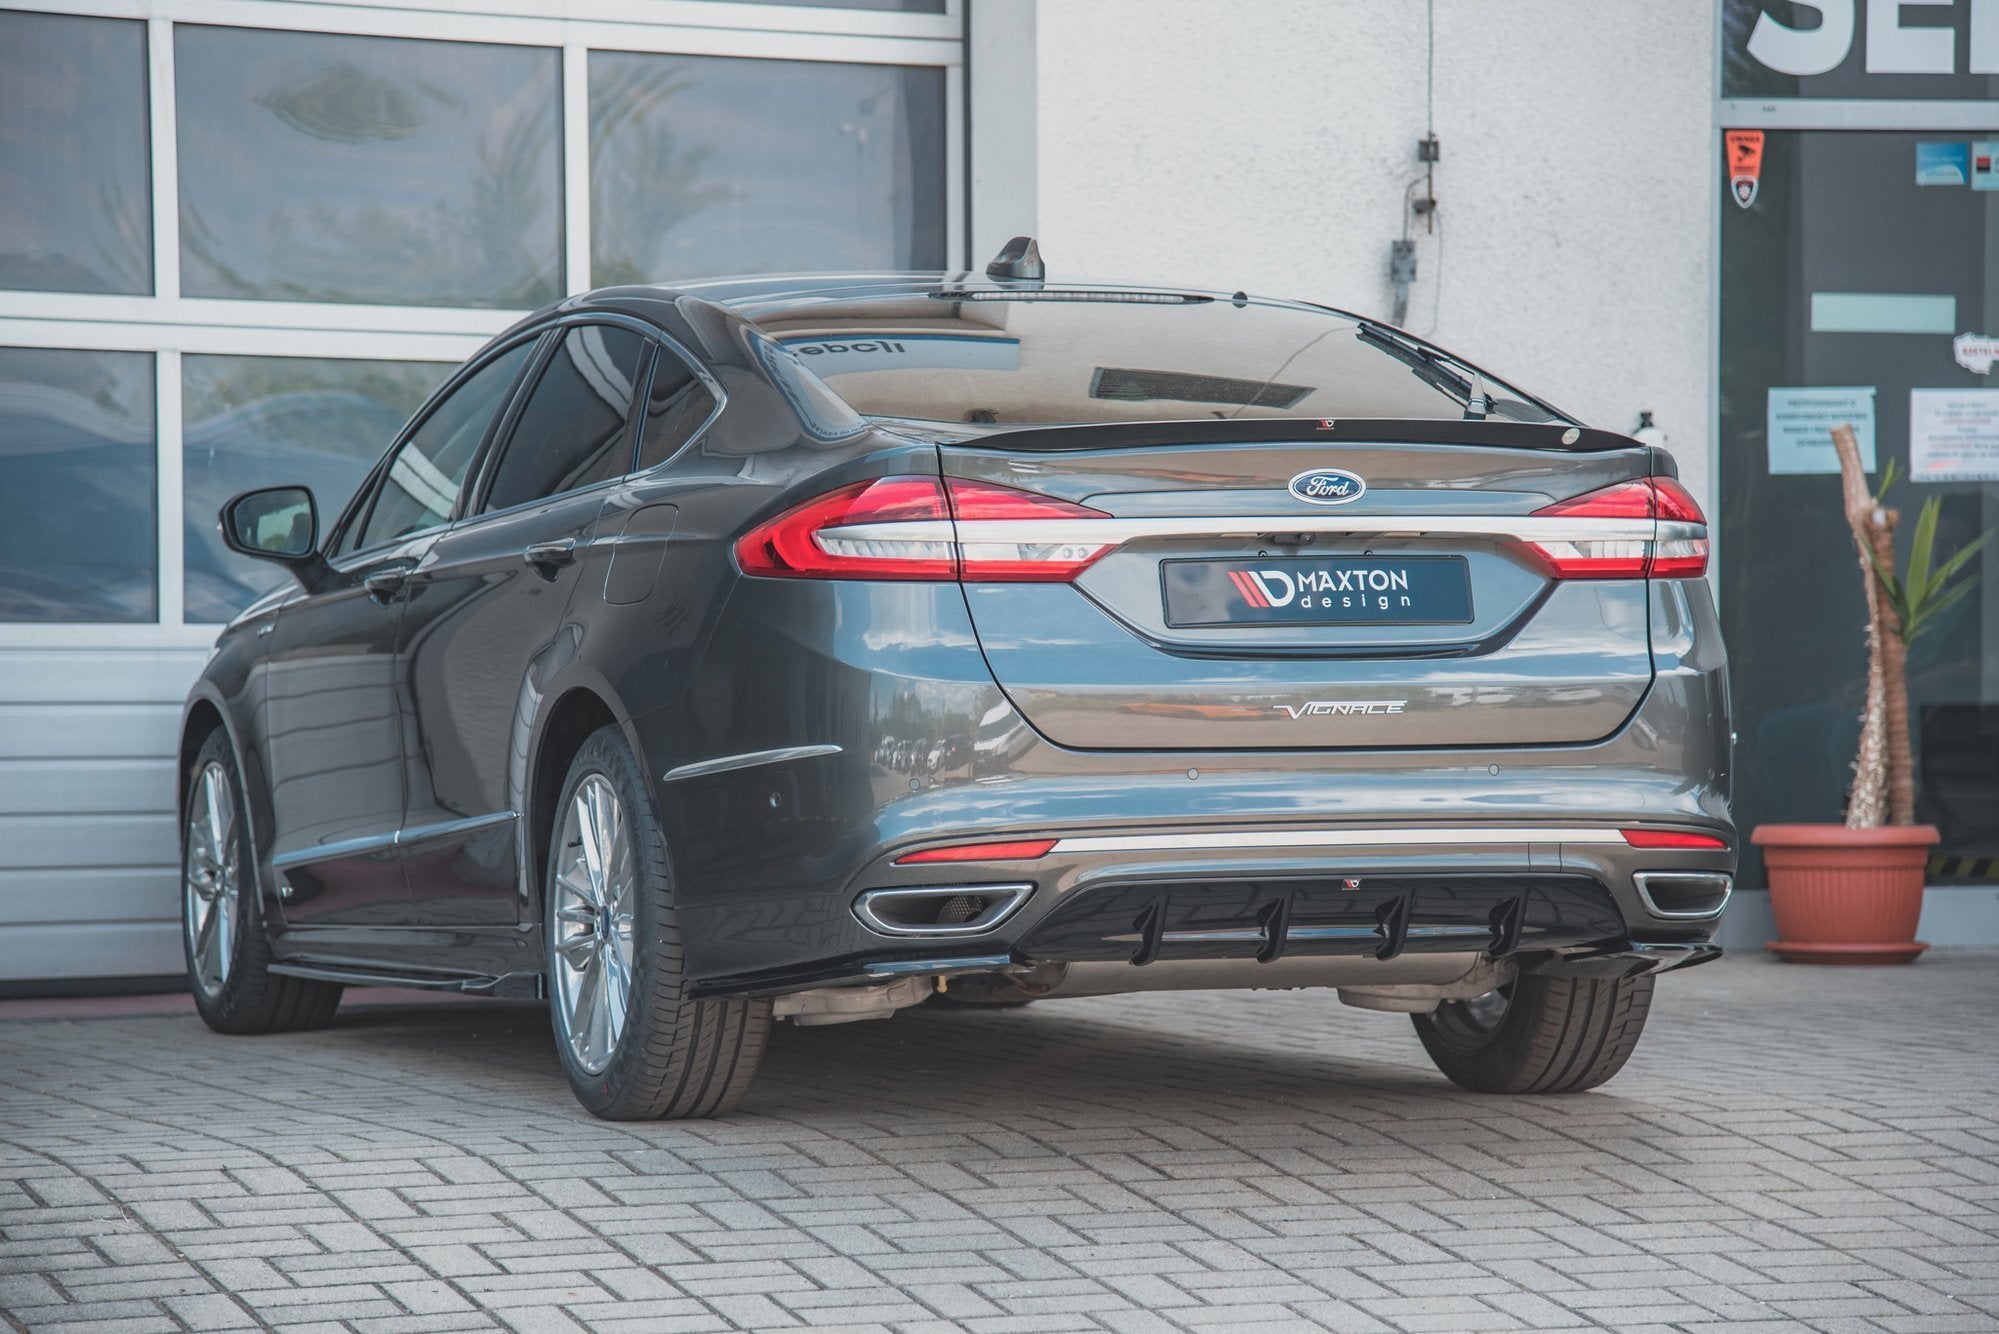 Rear Valance Ford Mondeo Vignale Mk5 Facelift